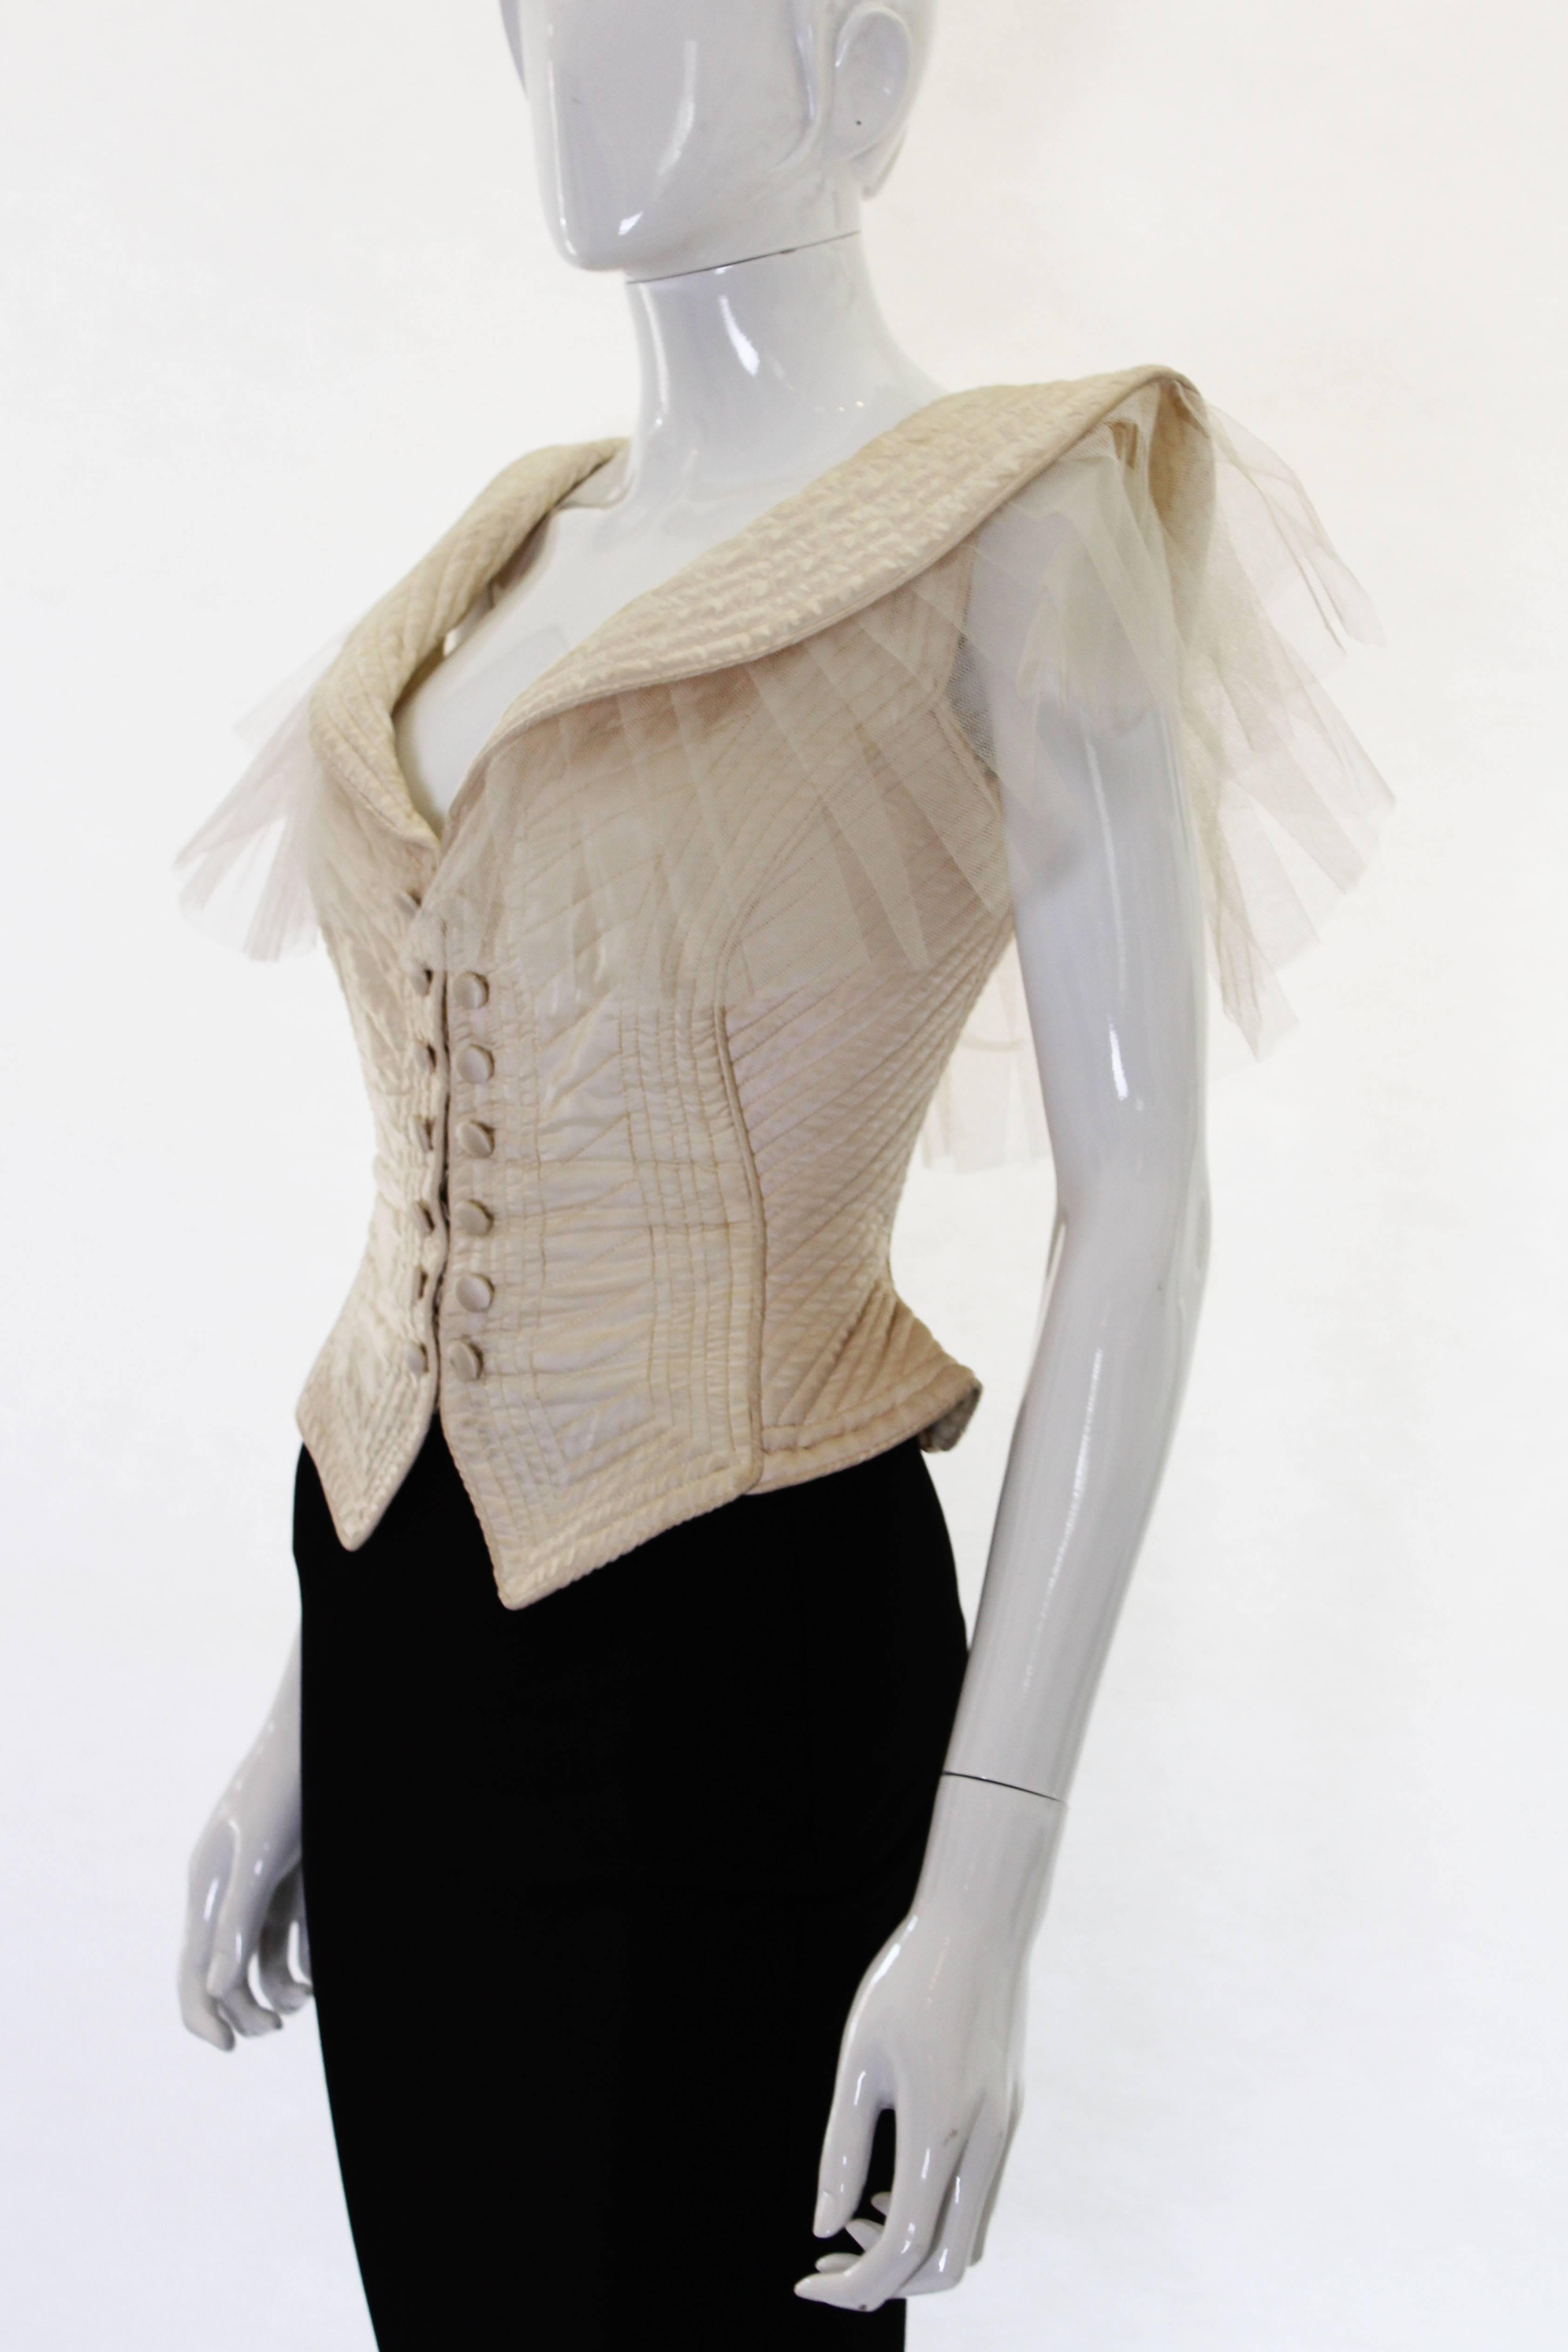 A stunning 1970s ivory satin waistcoat by Penny Green. It has a padded detail and stitchwork that is shaped so that it accentuates the waist. The sleeves are made of netting that comes out from under the collar in an almost wing like way. This item